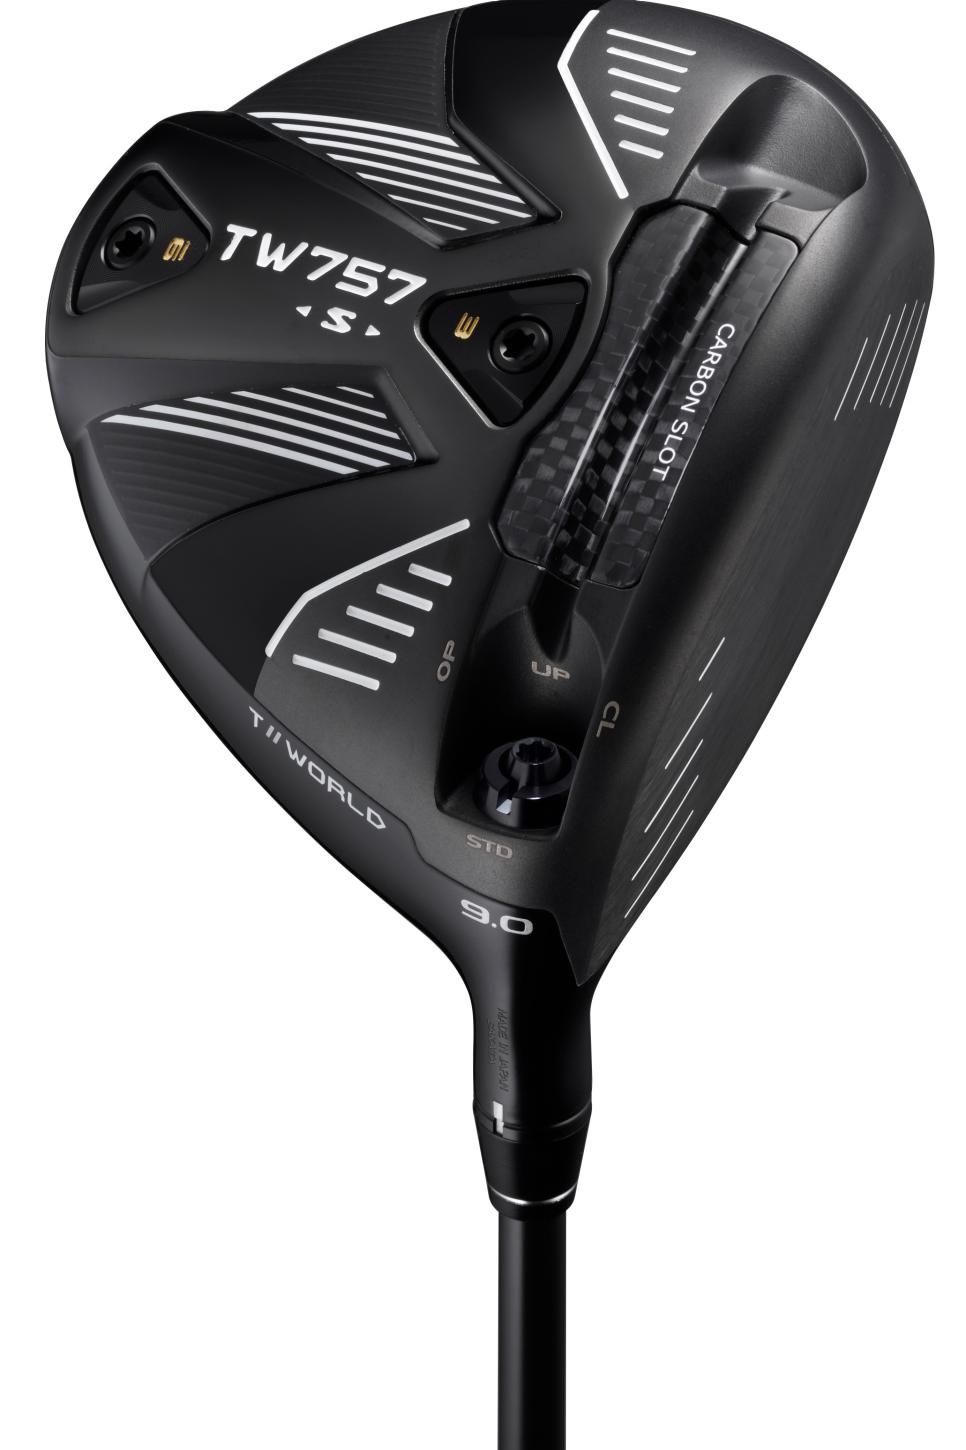 Honma T//World 757 lineup include woods with new adjustability and